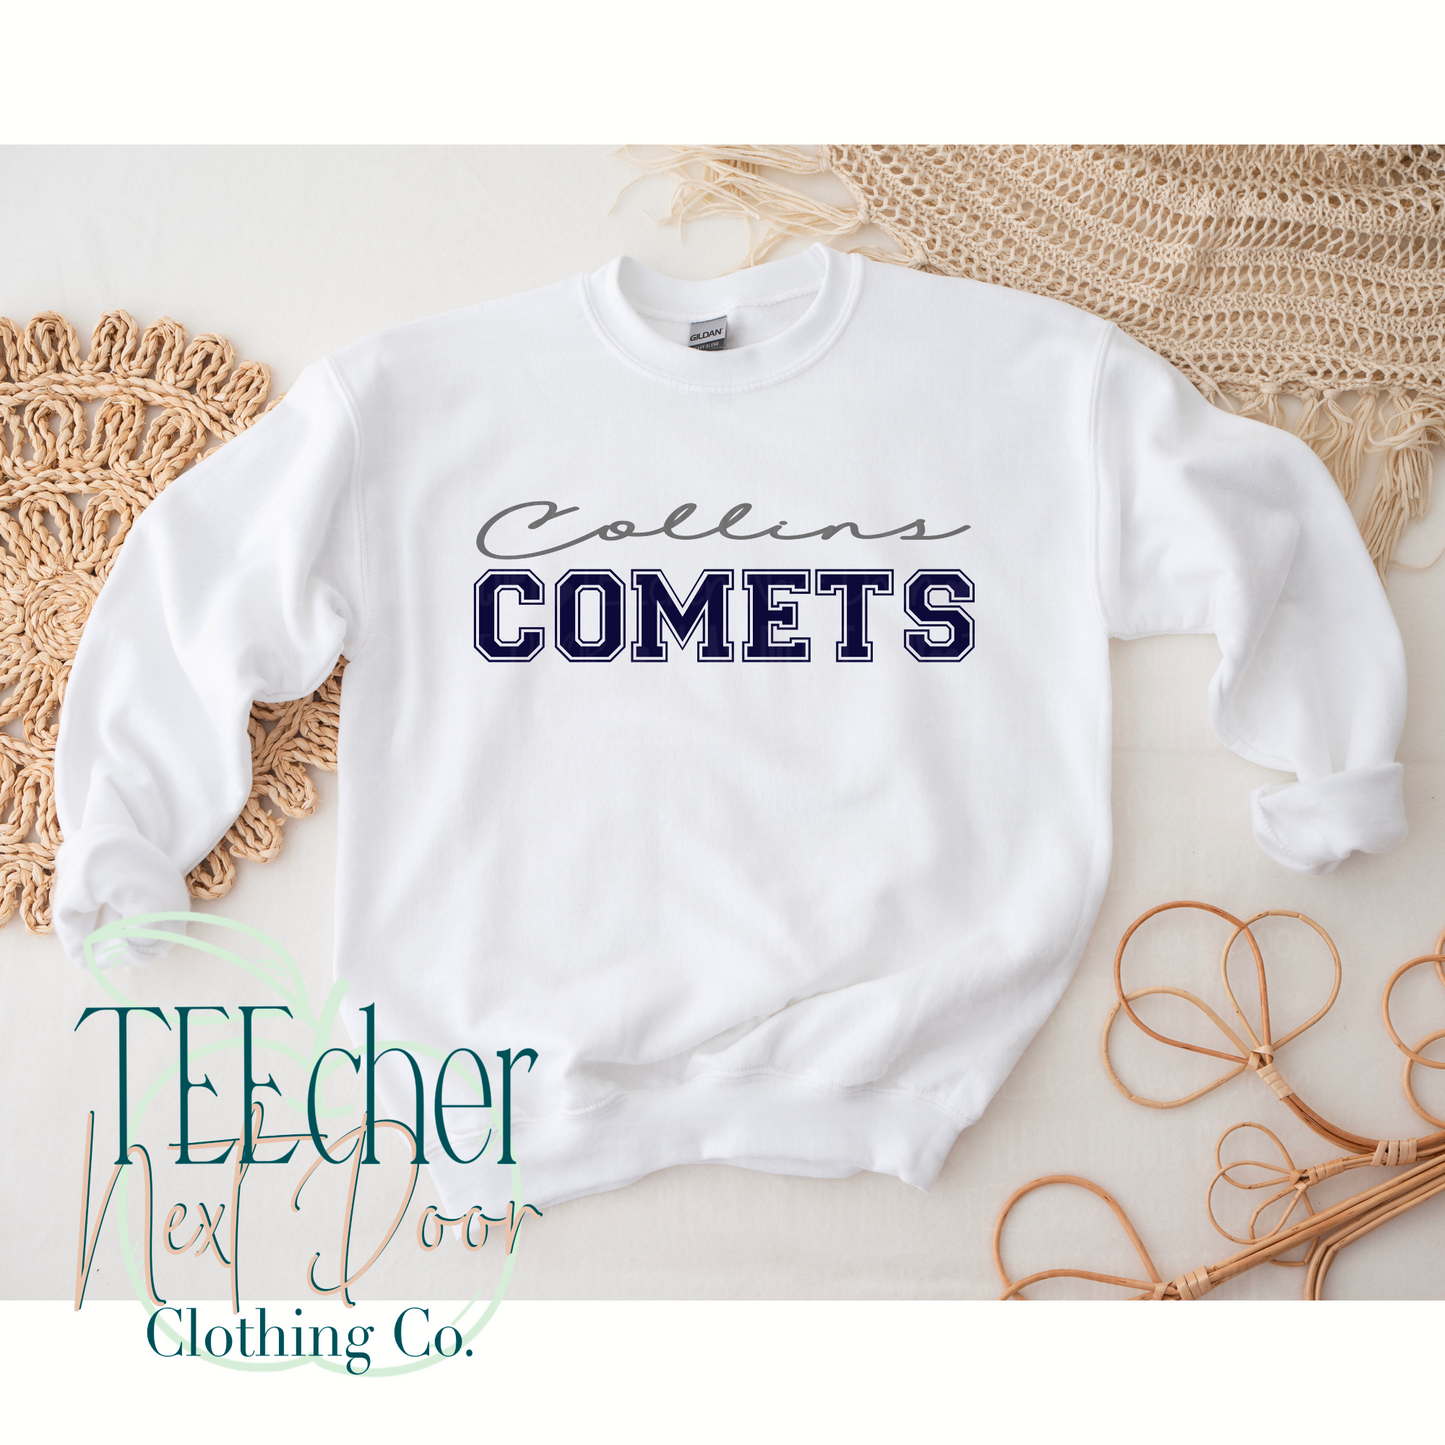 Collins Comets Traditional